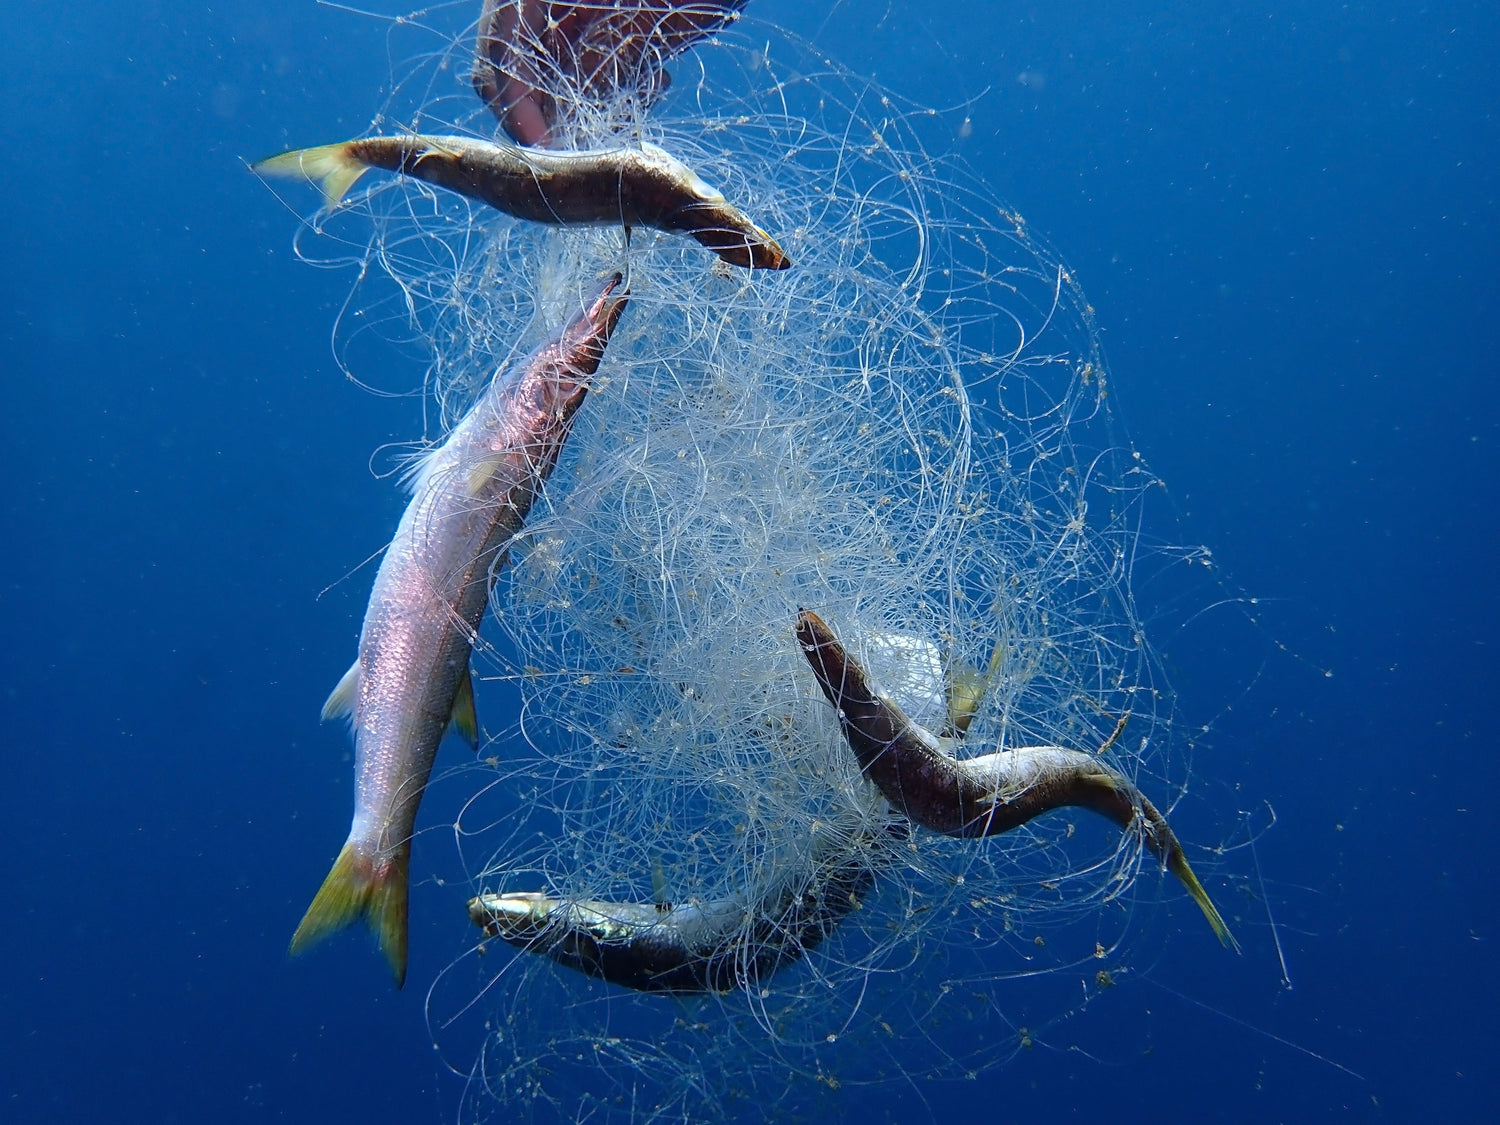 fish in the ocean caught in a swirl of fishing nets